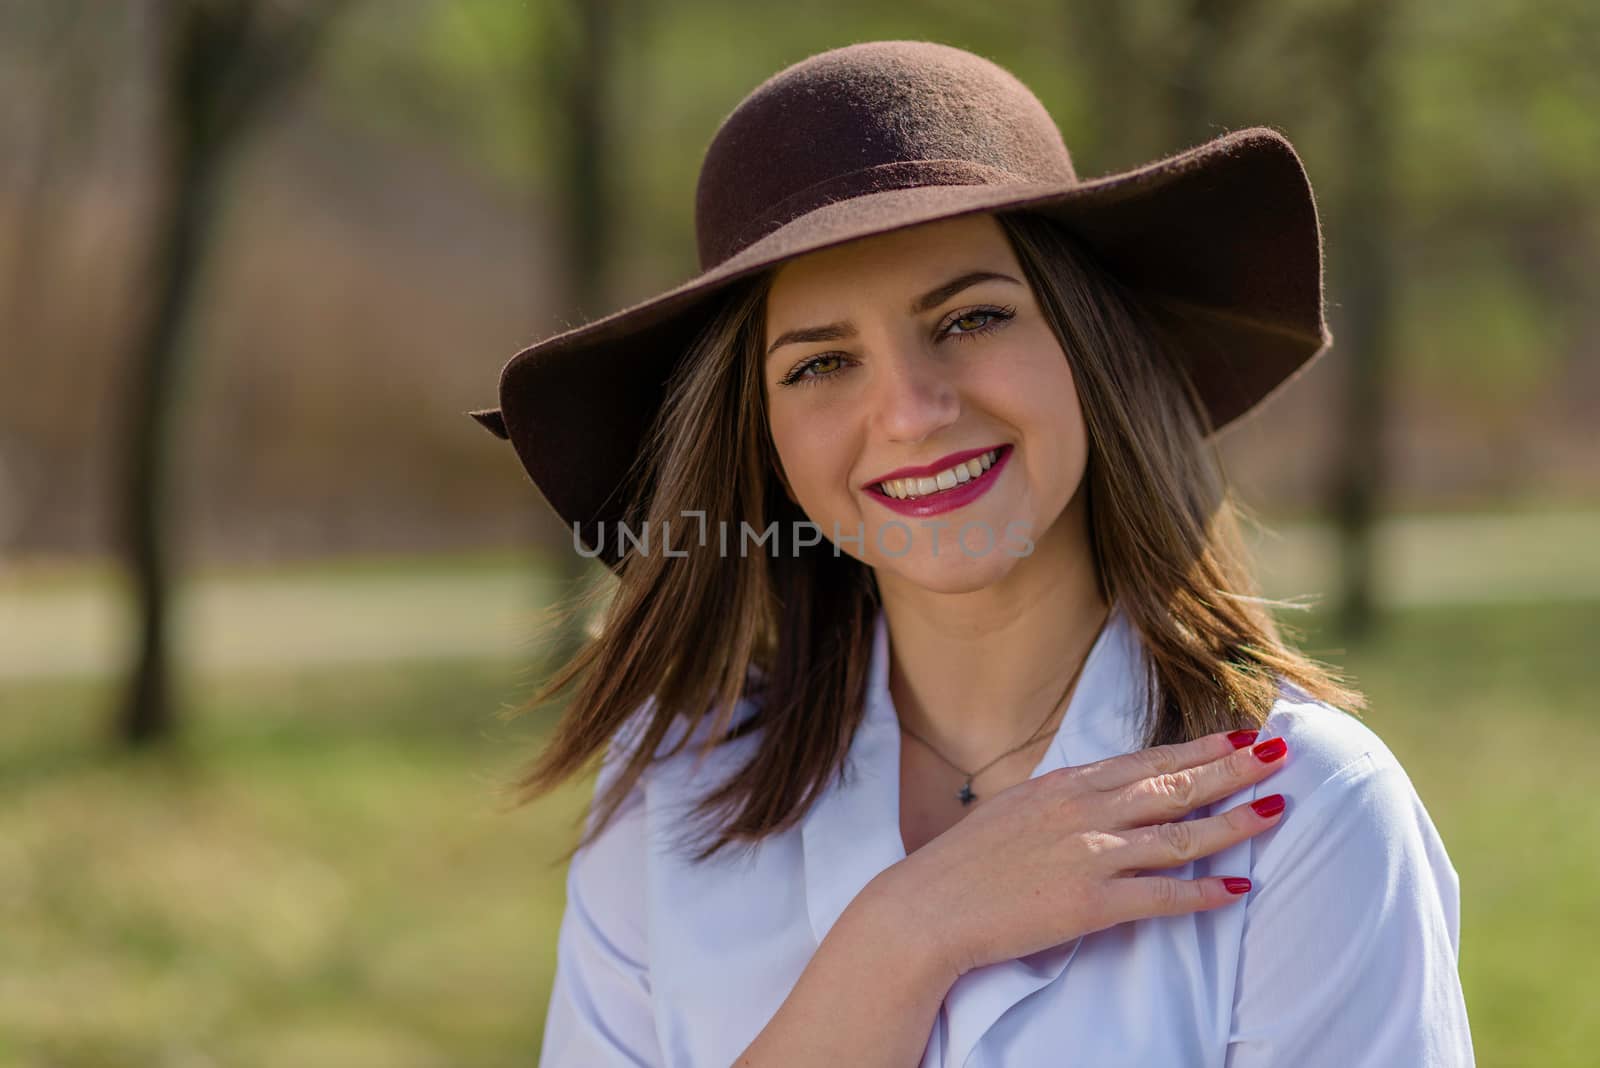 Portrait of a smiling young woman, holding her hand on her shoulder and wearing a hat in a park during spring. Woman bowed her head head to the left side of frame. Medium shot. Shallow depth of field.